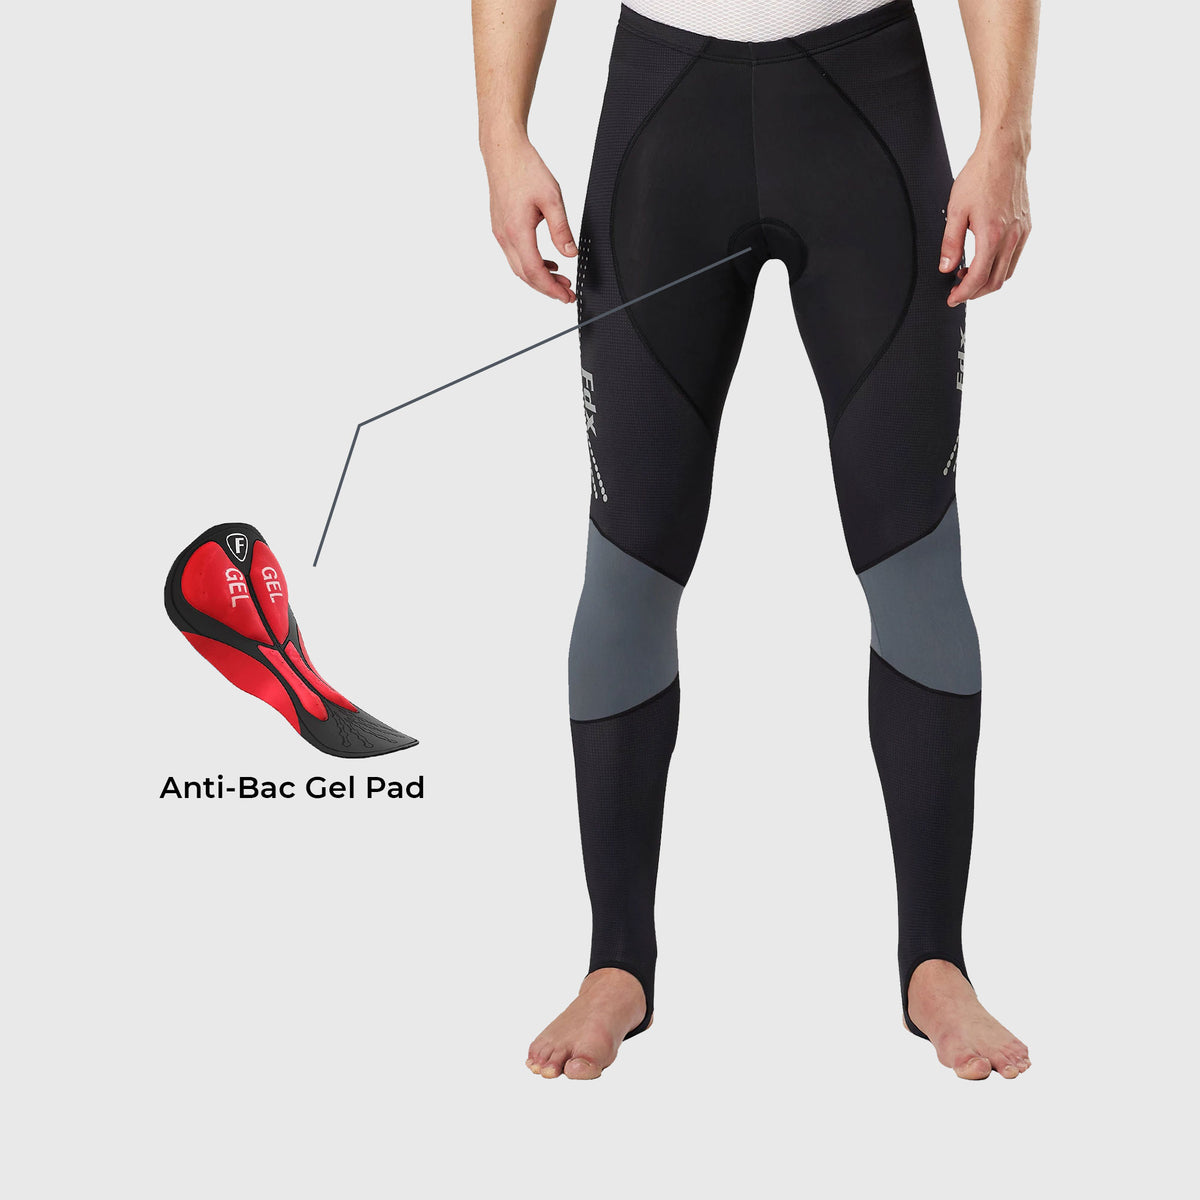 Fdx Thermodream Men's Padded Winter Cycling Tights Grey, Red